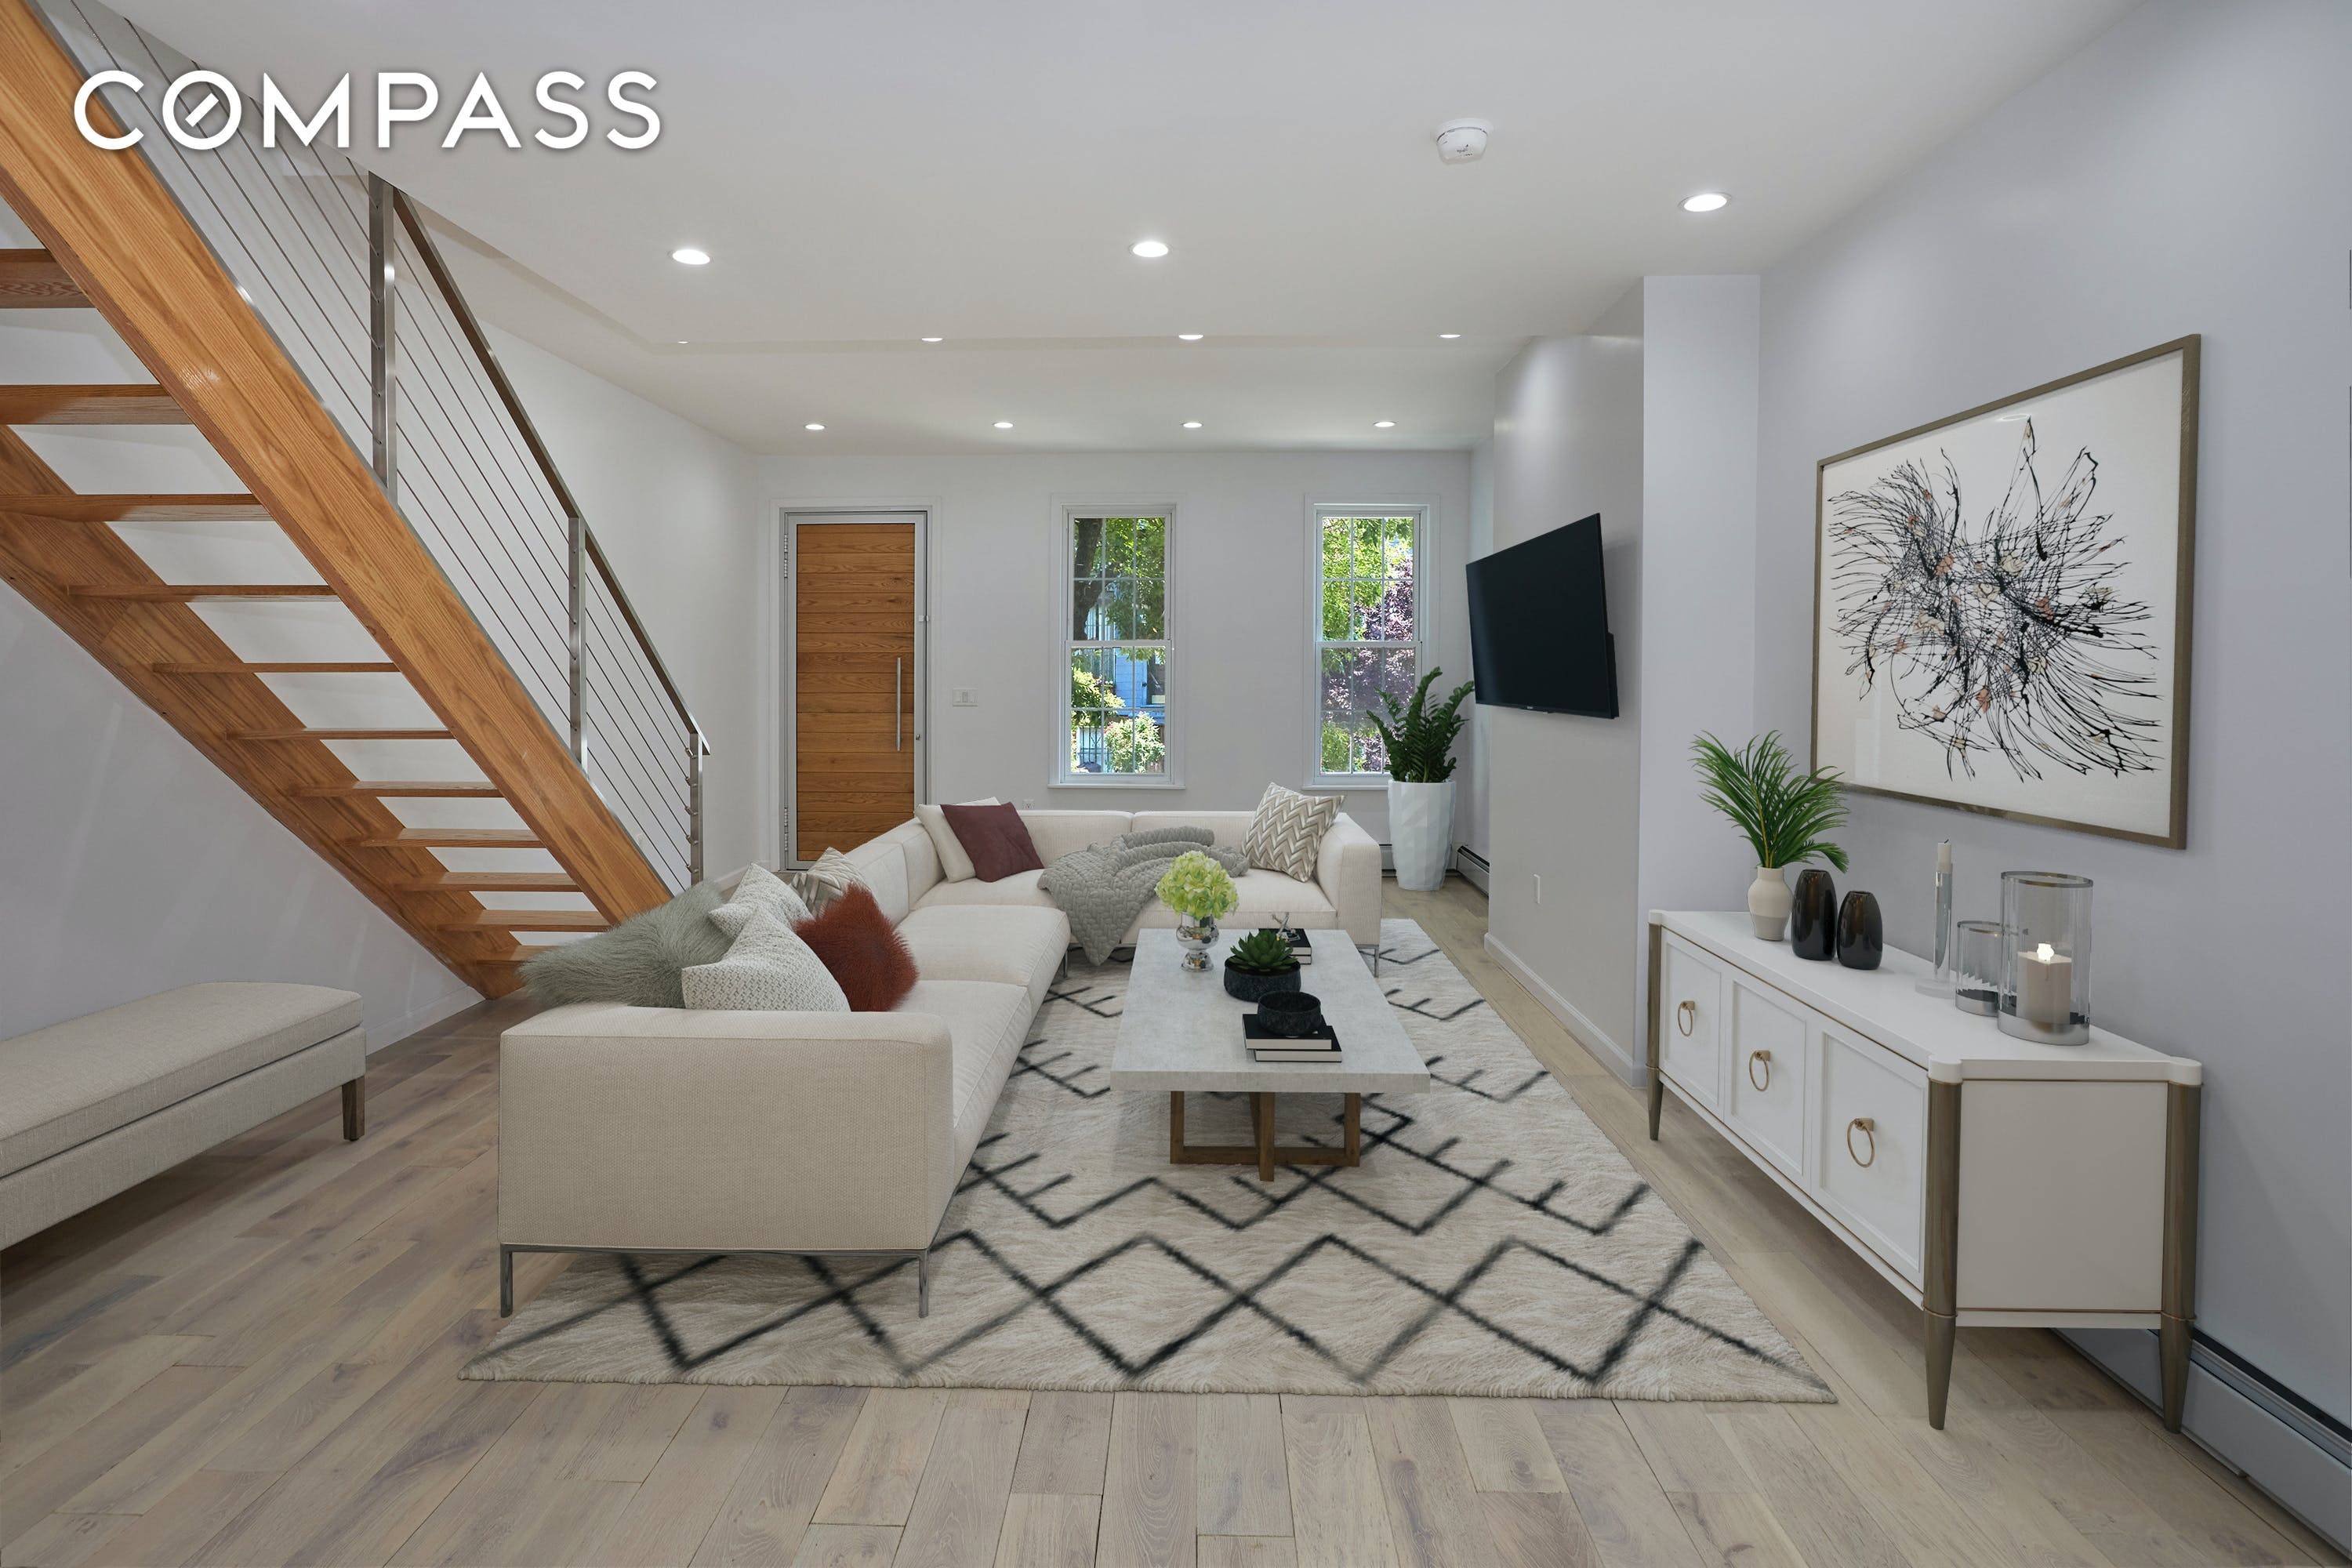 This stunning, gut renovated two family building ticks every box with gorgeous designer interiors, smart home features and fantastic outdoor space on a tree lined Clinton Hill block.